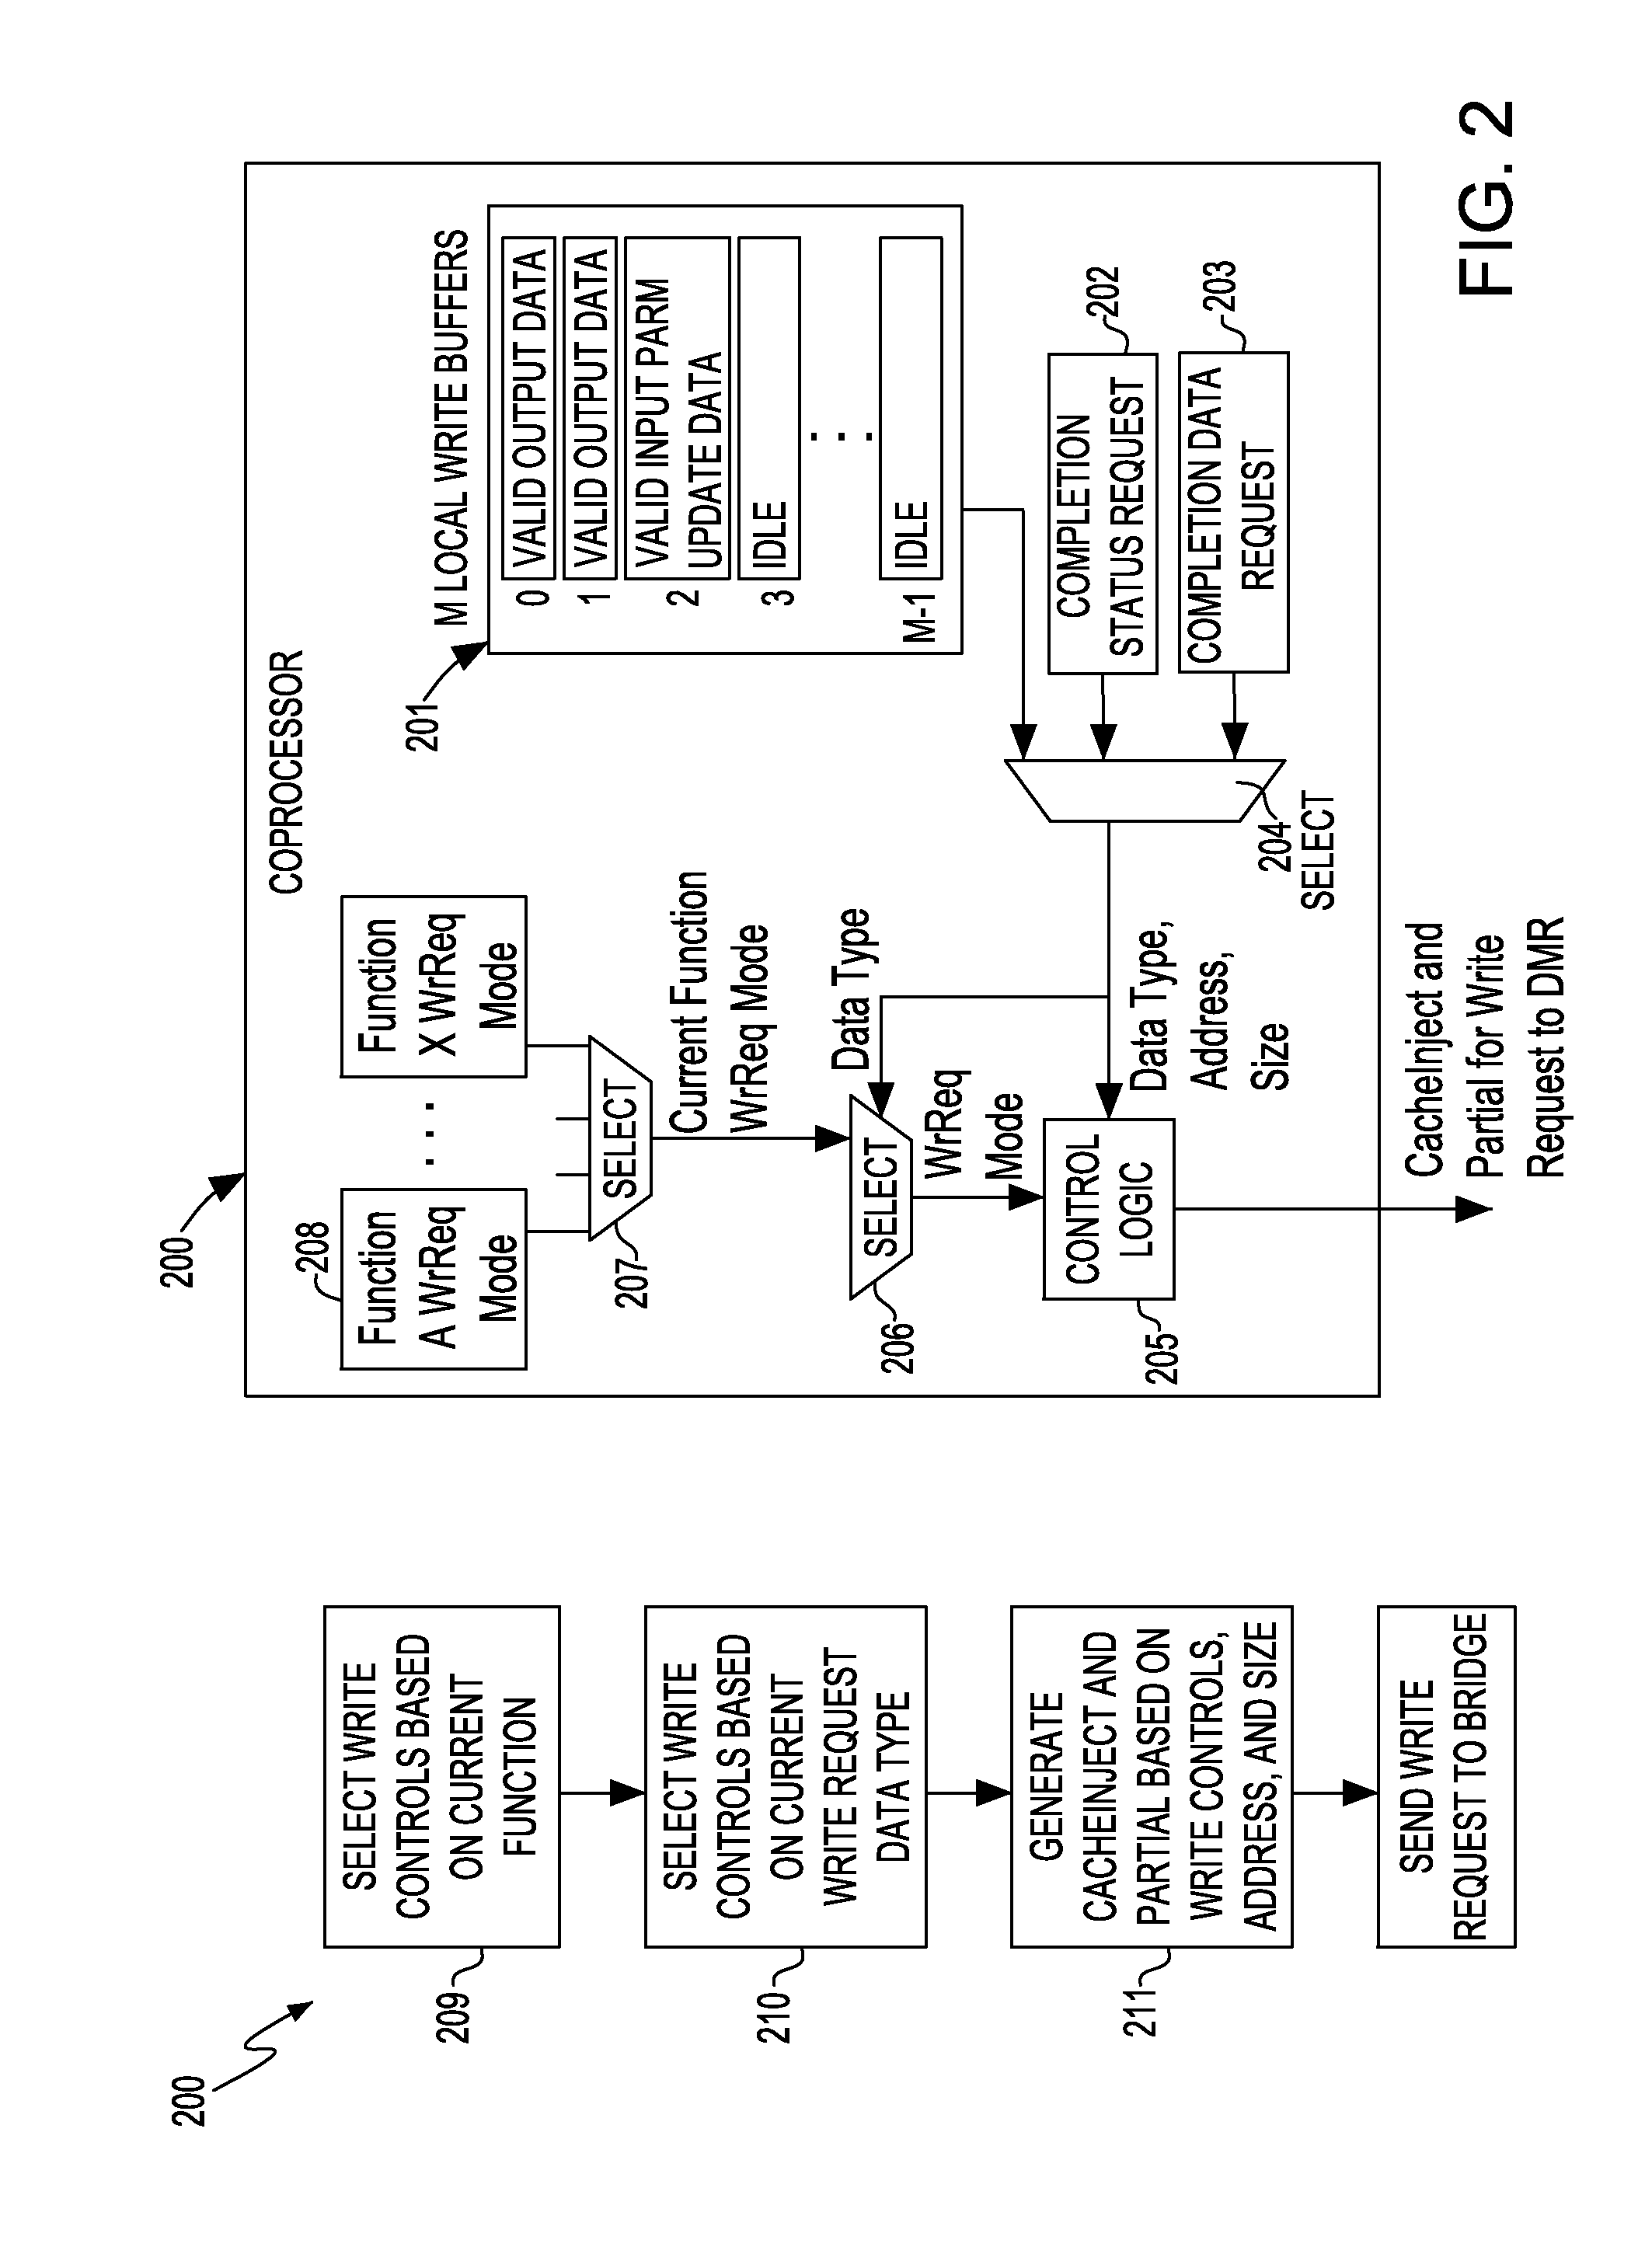 Dynamic Control of Cache Injection Based on Write Data Type